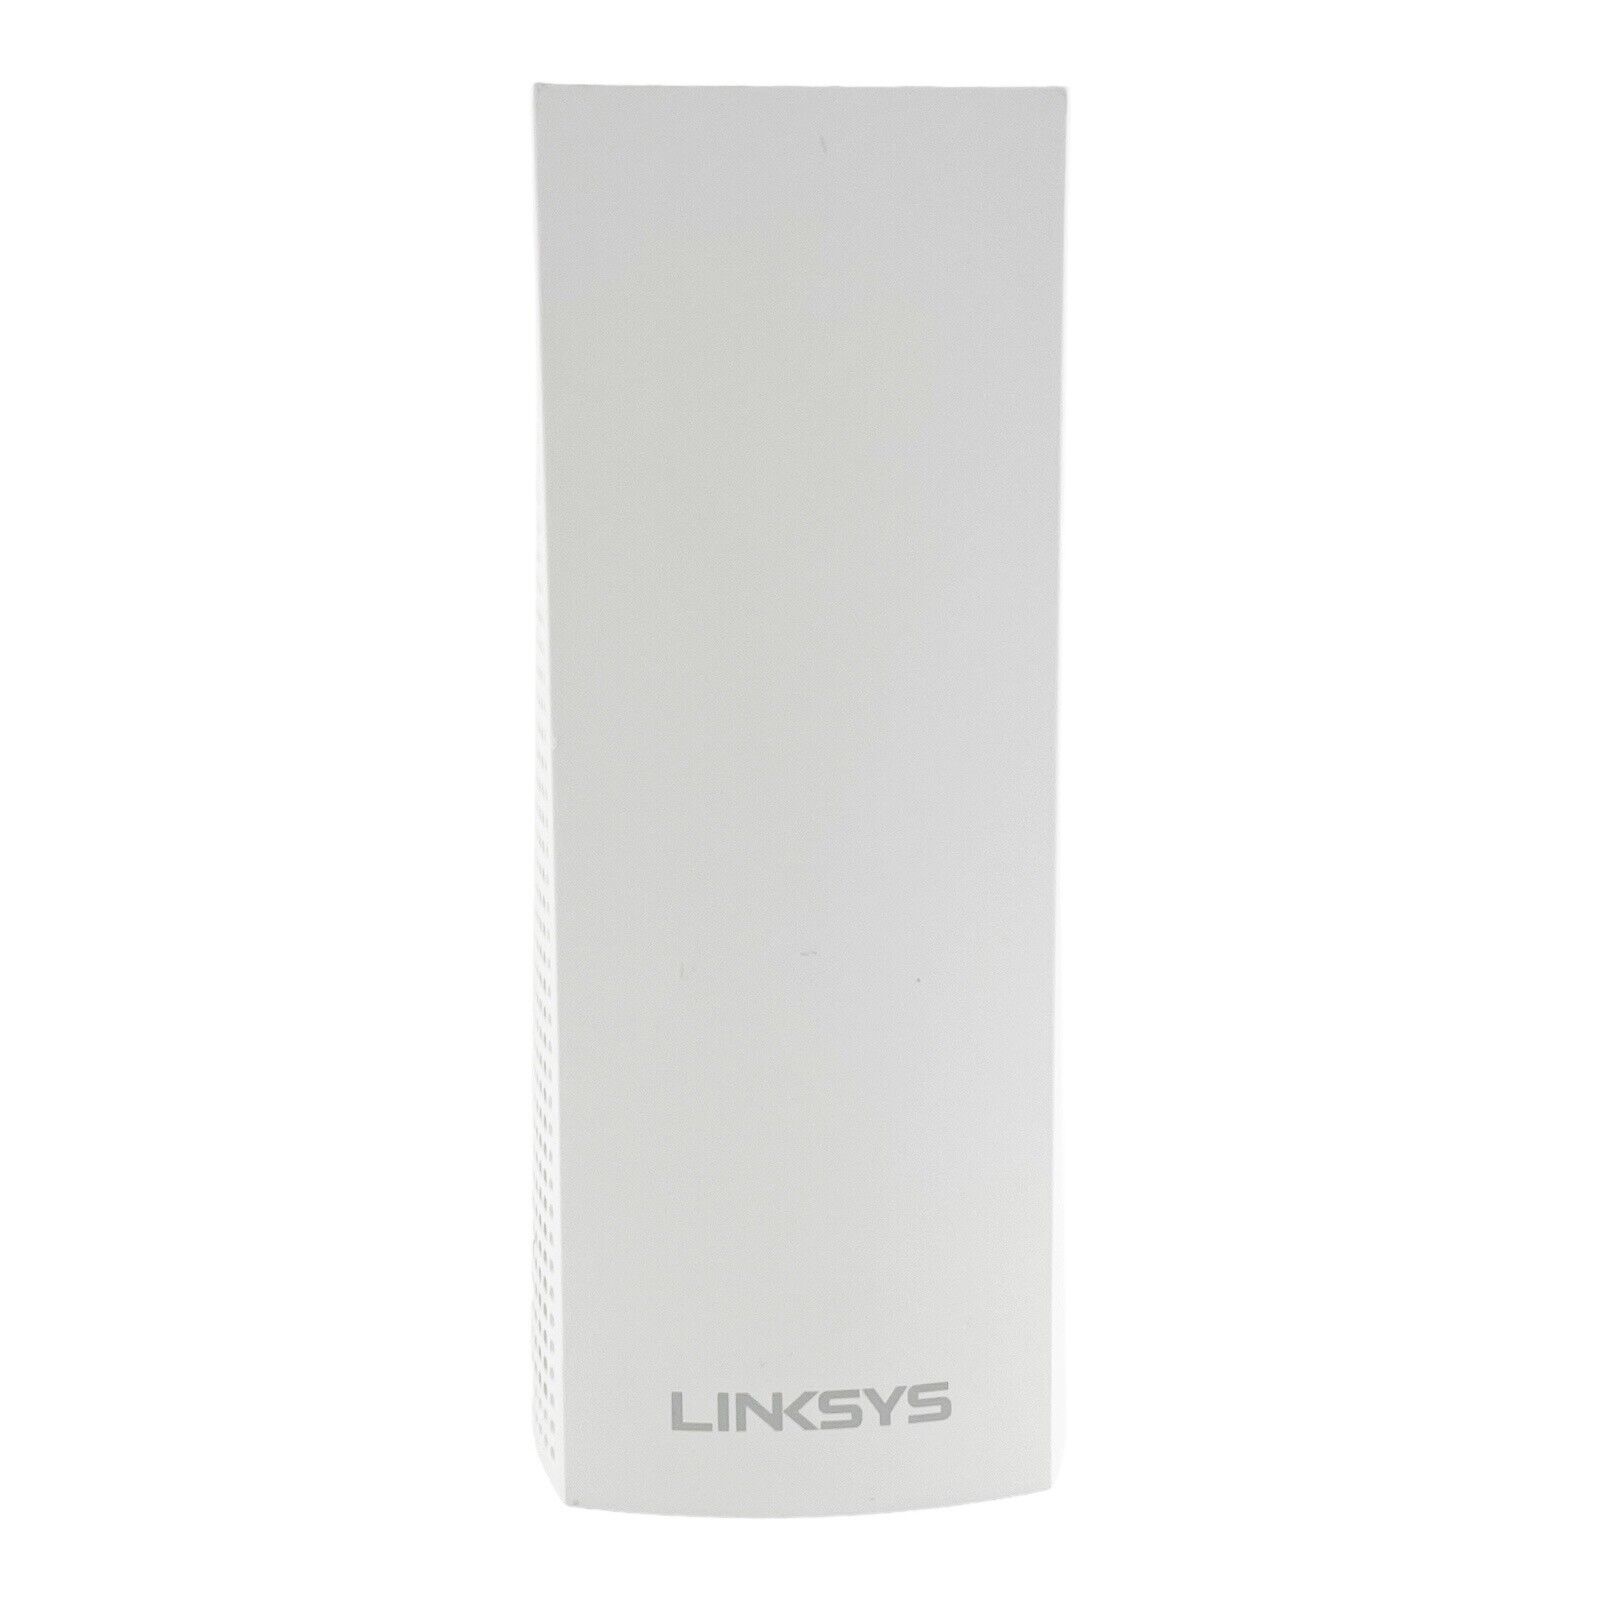 Linksys Velop WHW03 Wi-Fi System Tri-Band Mesh Router AC2200 (NO POWER CORD)